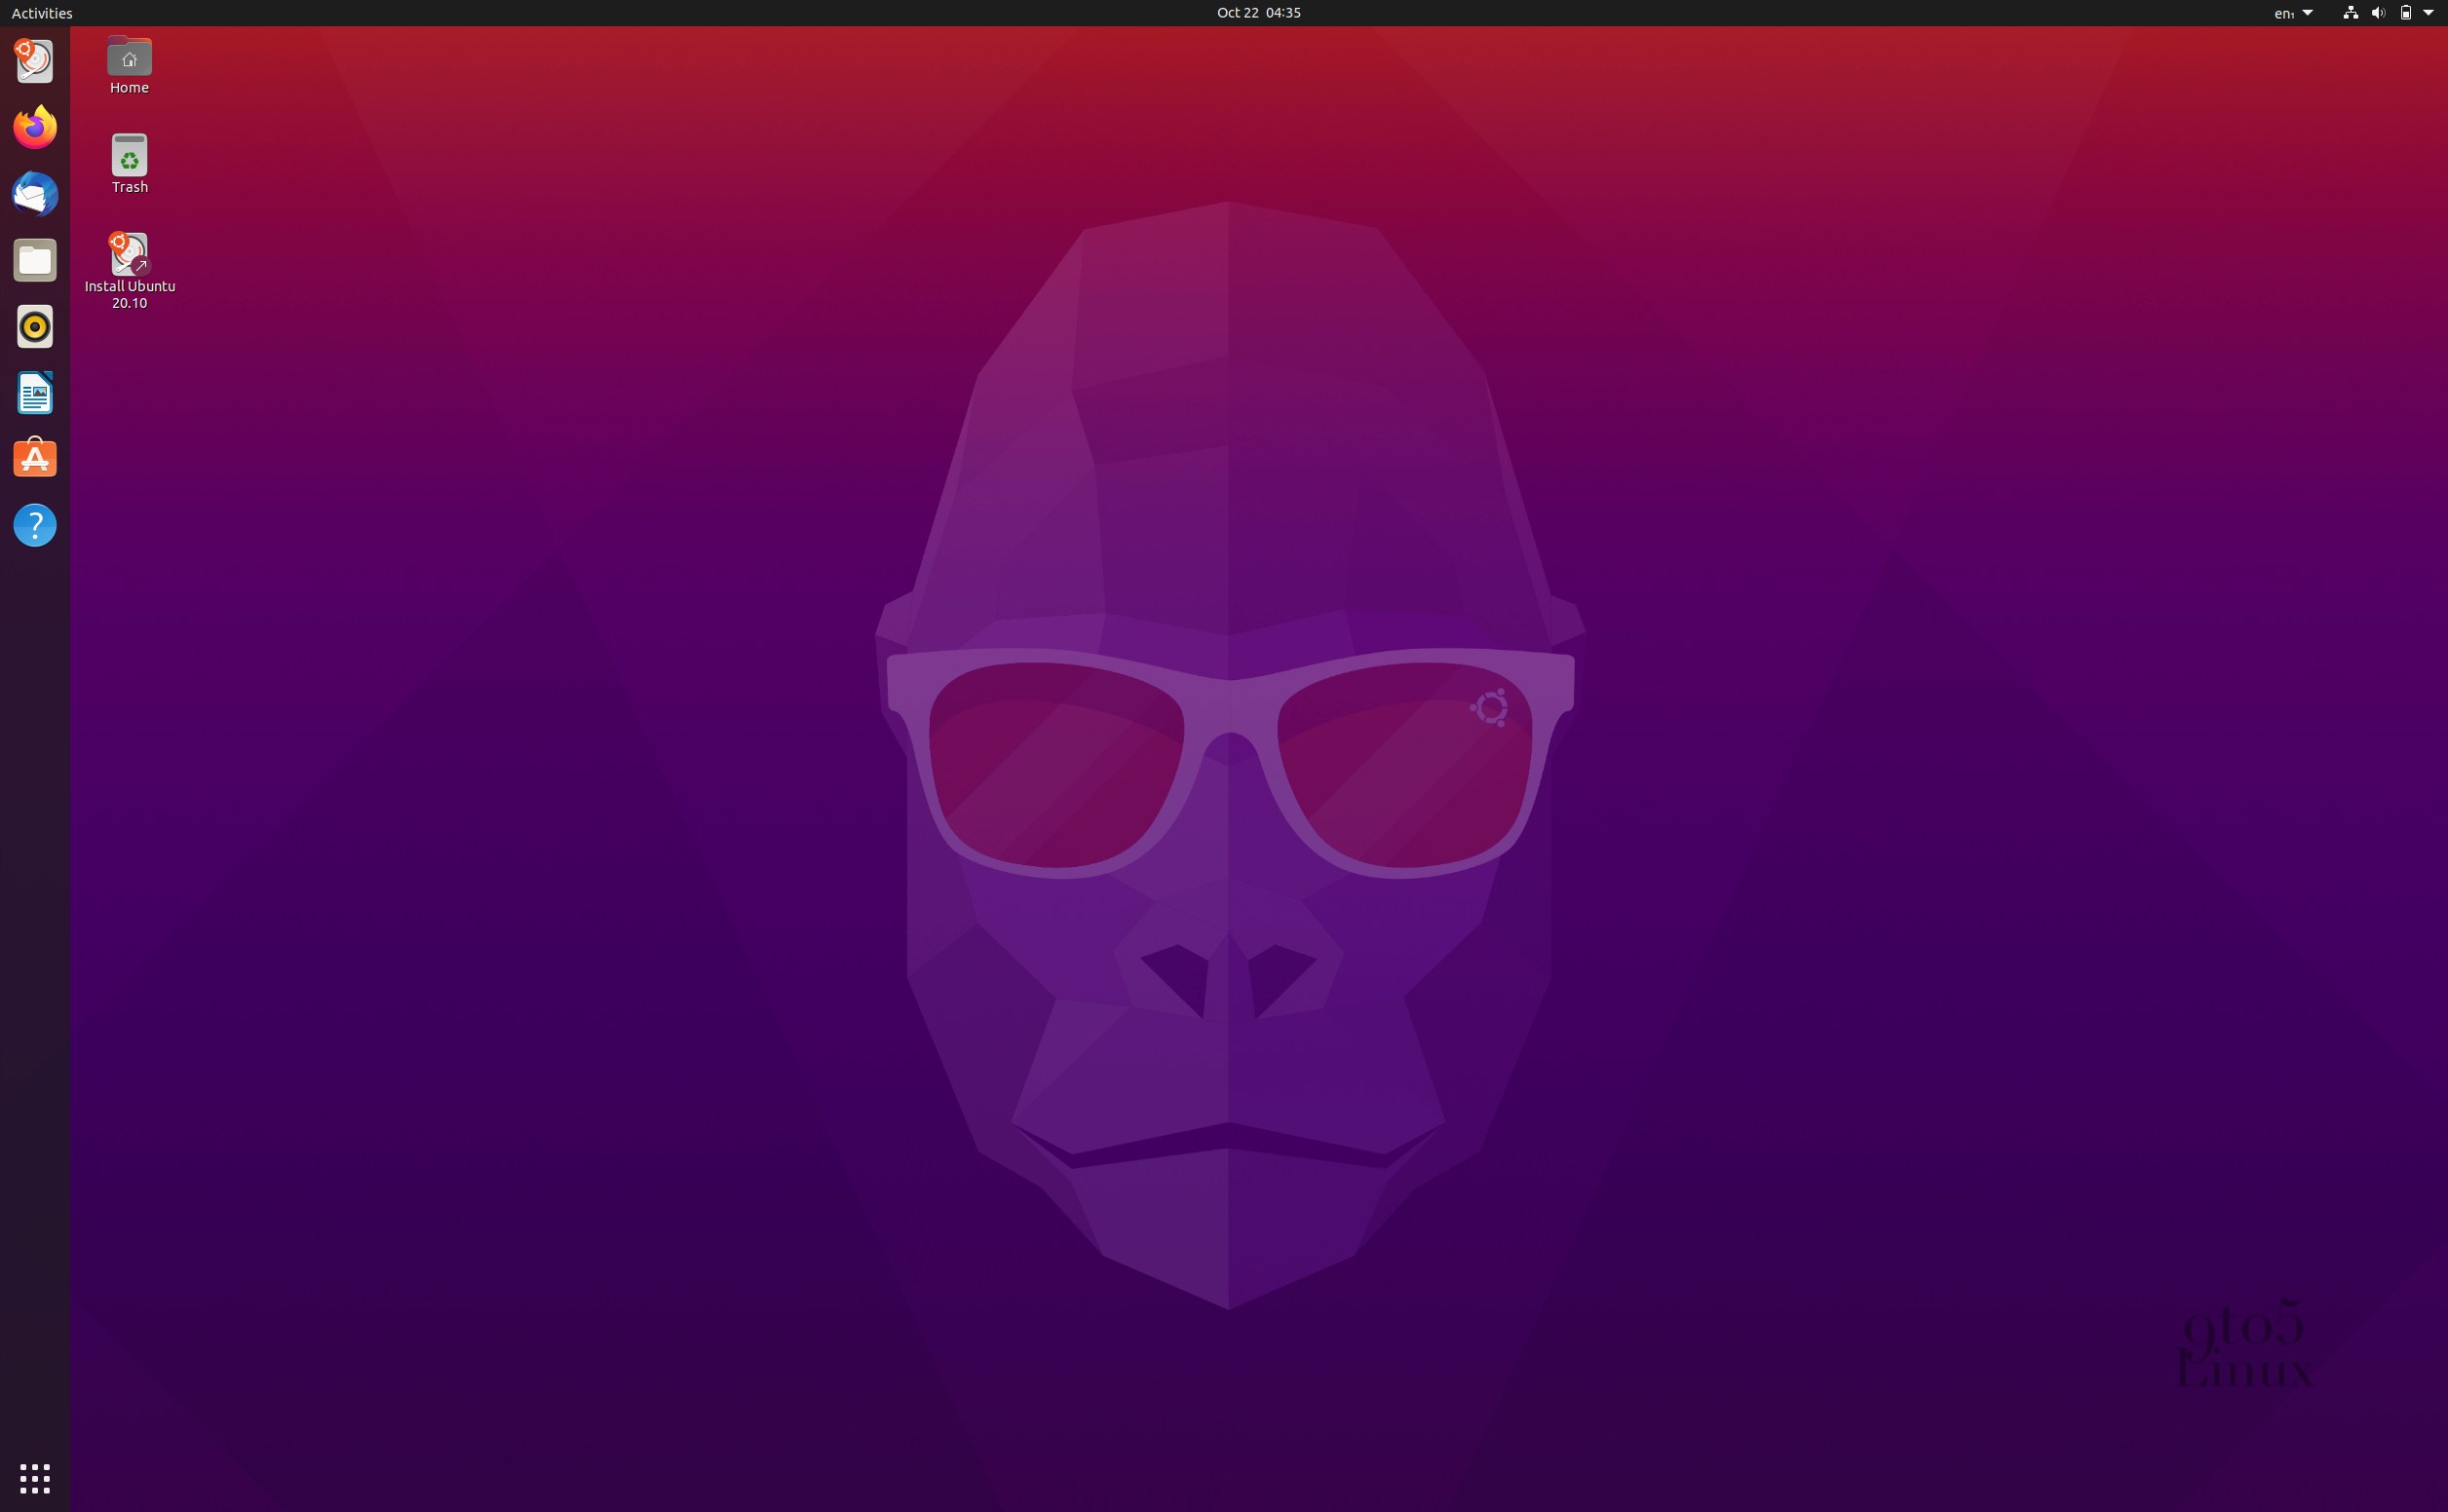 Ubuntu 20.10 (Groovy Gorilla) Is Now Available for Download, This Is What’s New